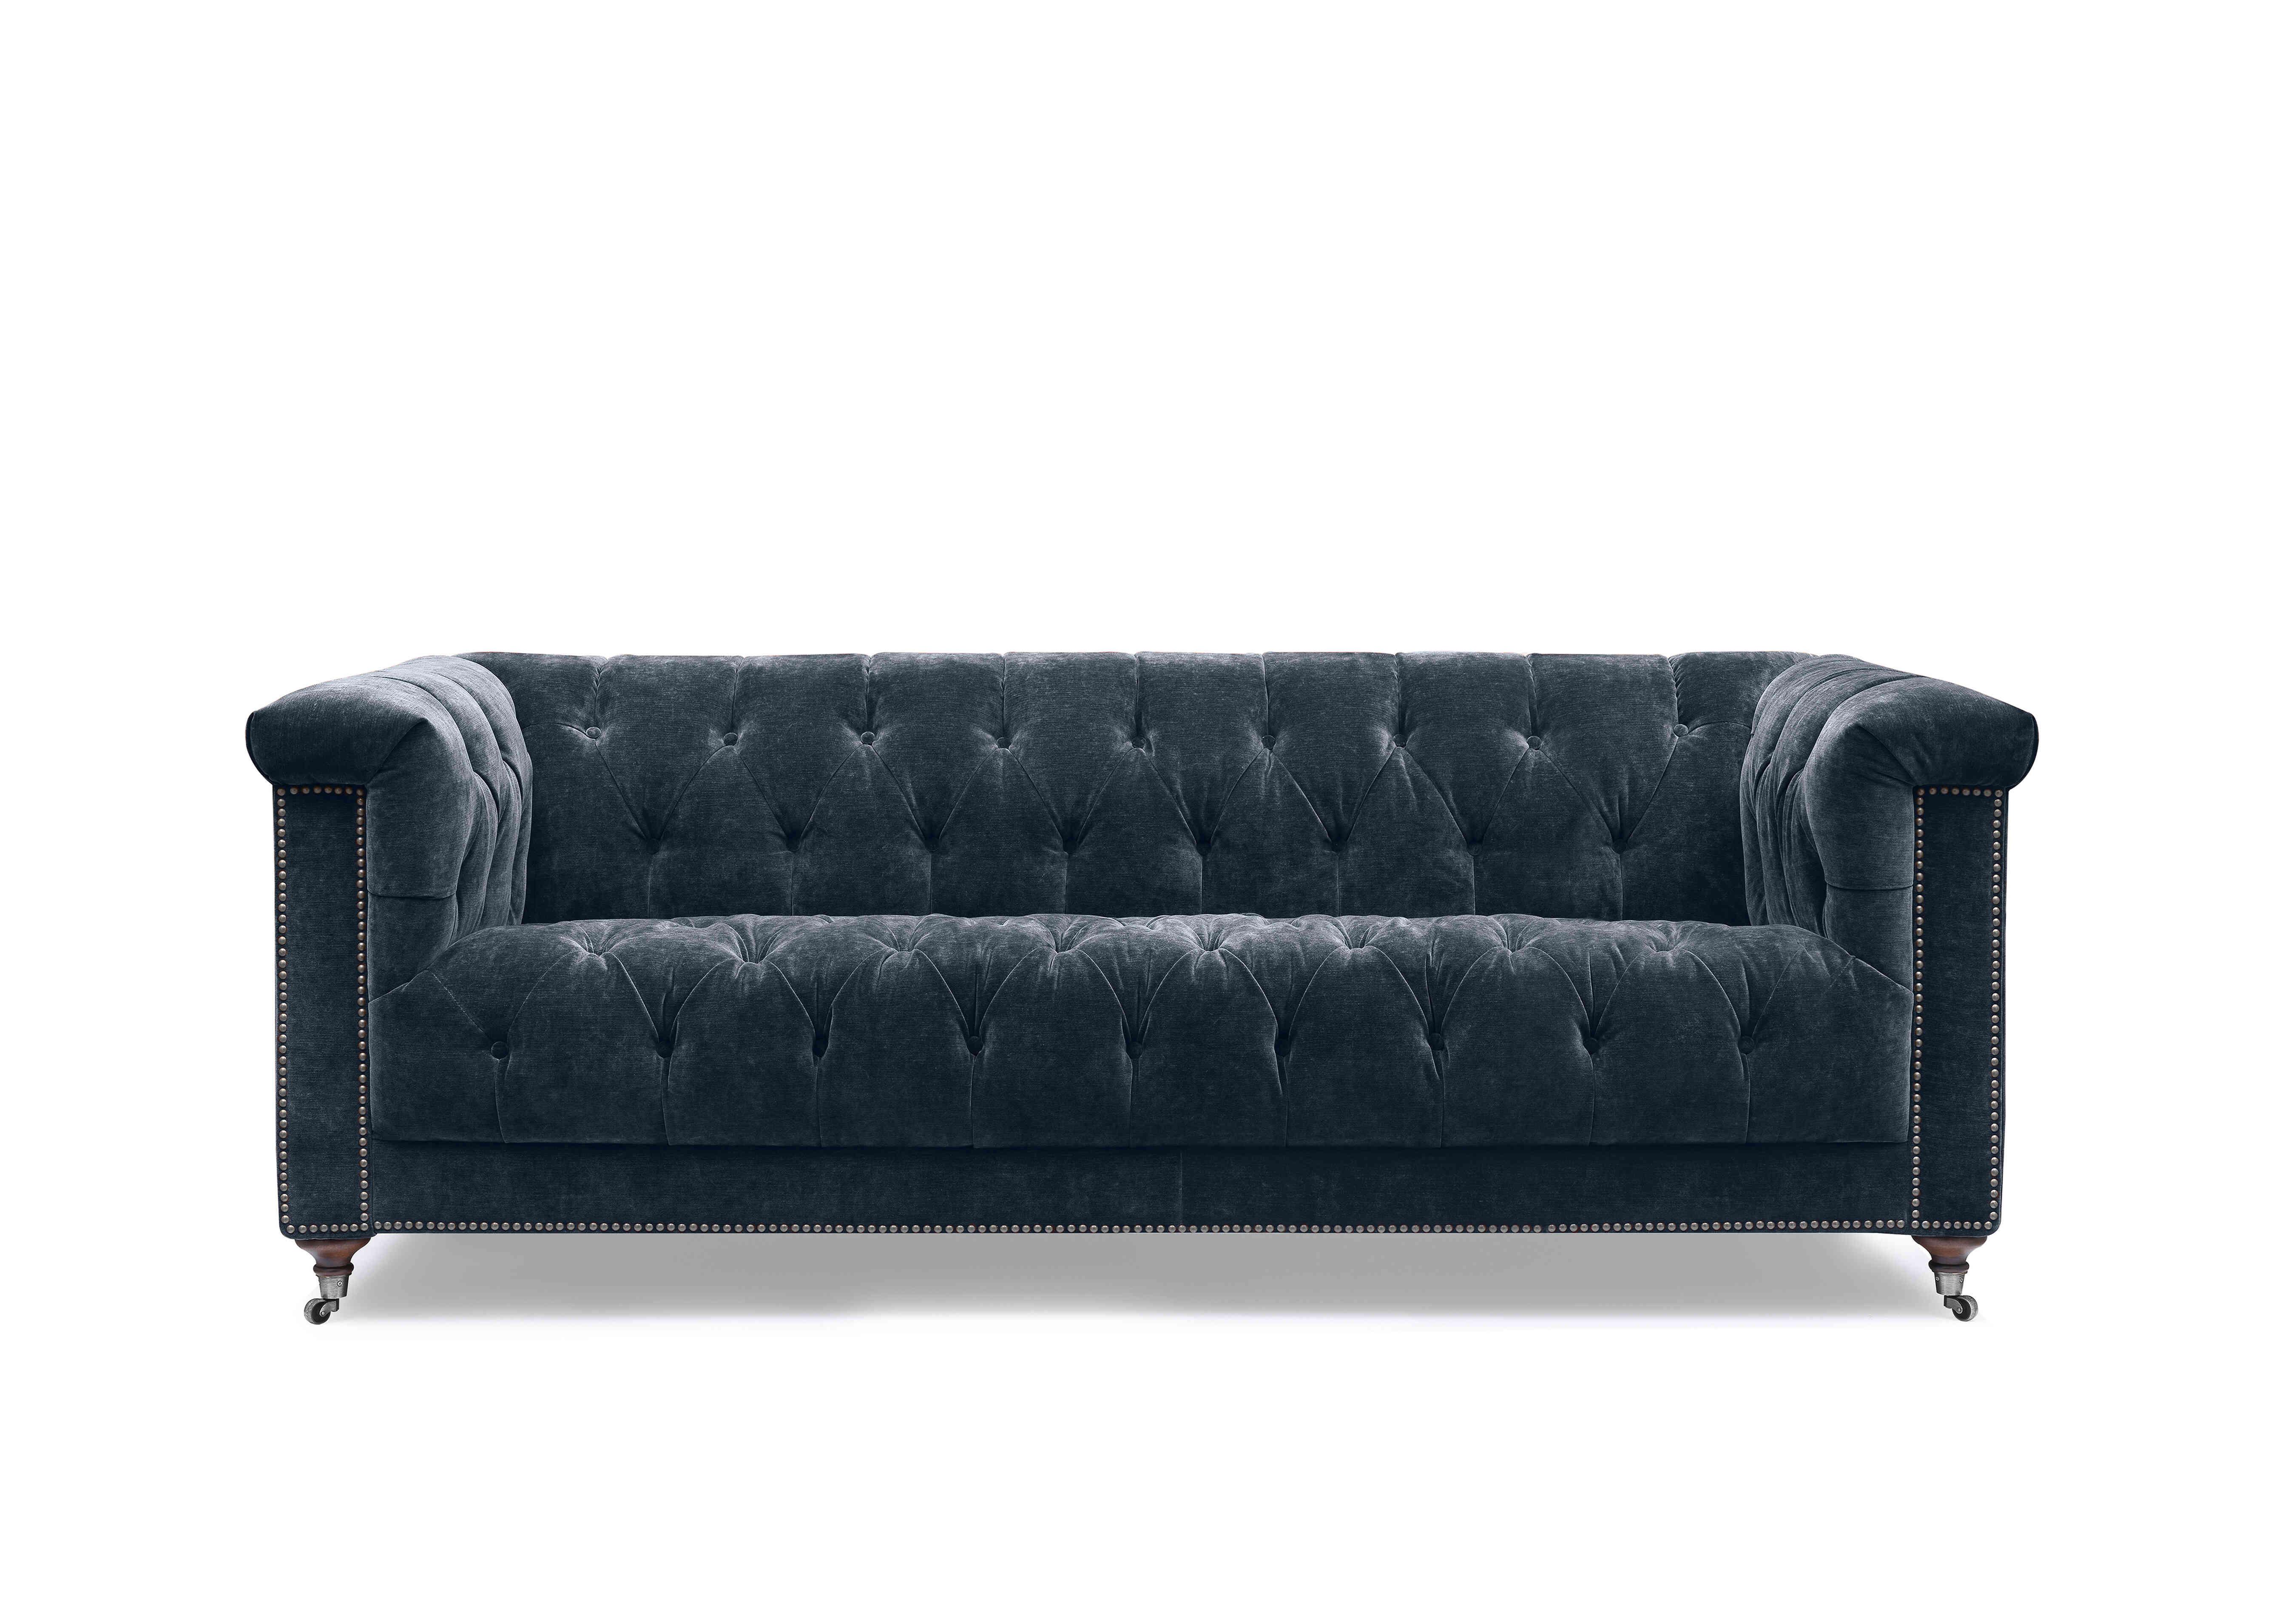 Wallace 3 Seater Fabric Chesterfield Sofa with USB-C in X3y2-W024 Midnight on Furniture Village